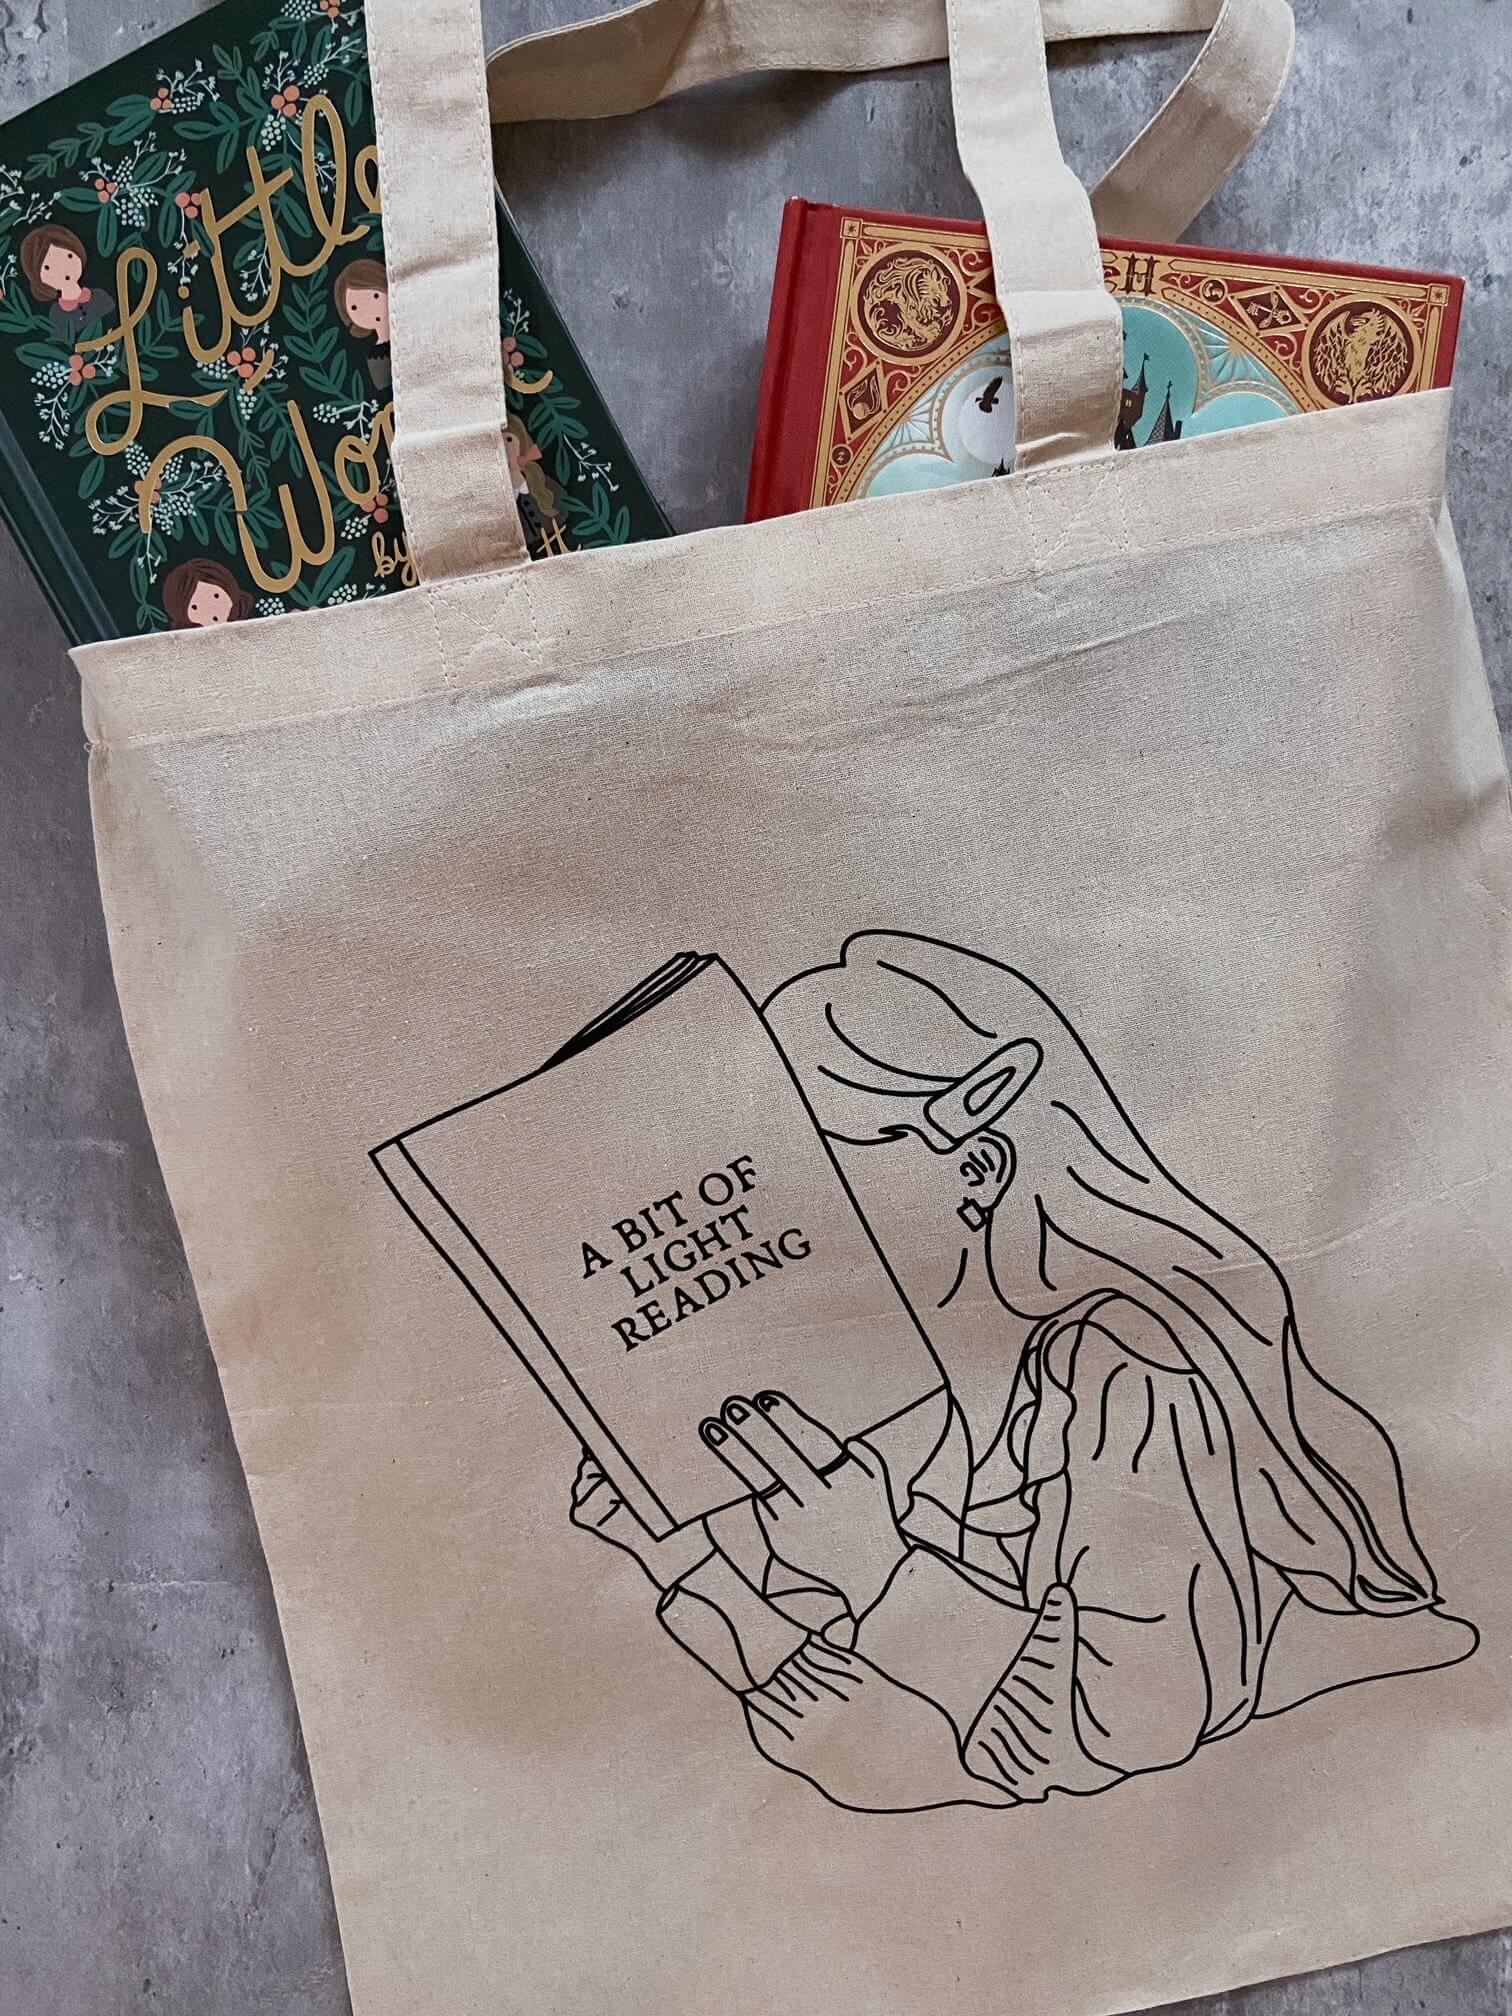 natural canvas tote bag with image of girl reading book titled "A Bit of Light Reading" and books inside.